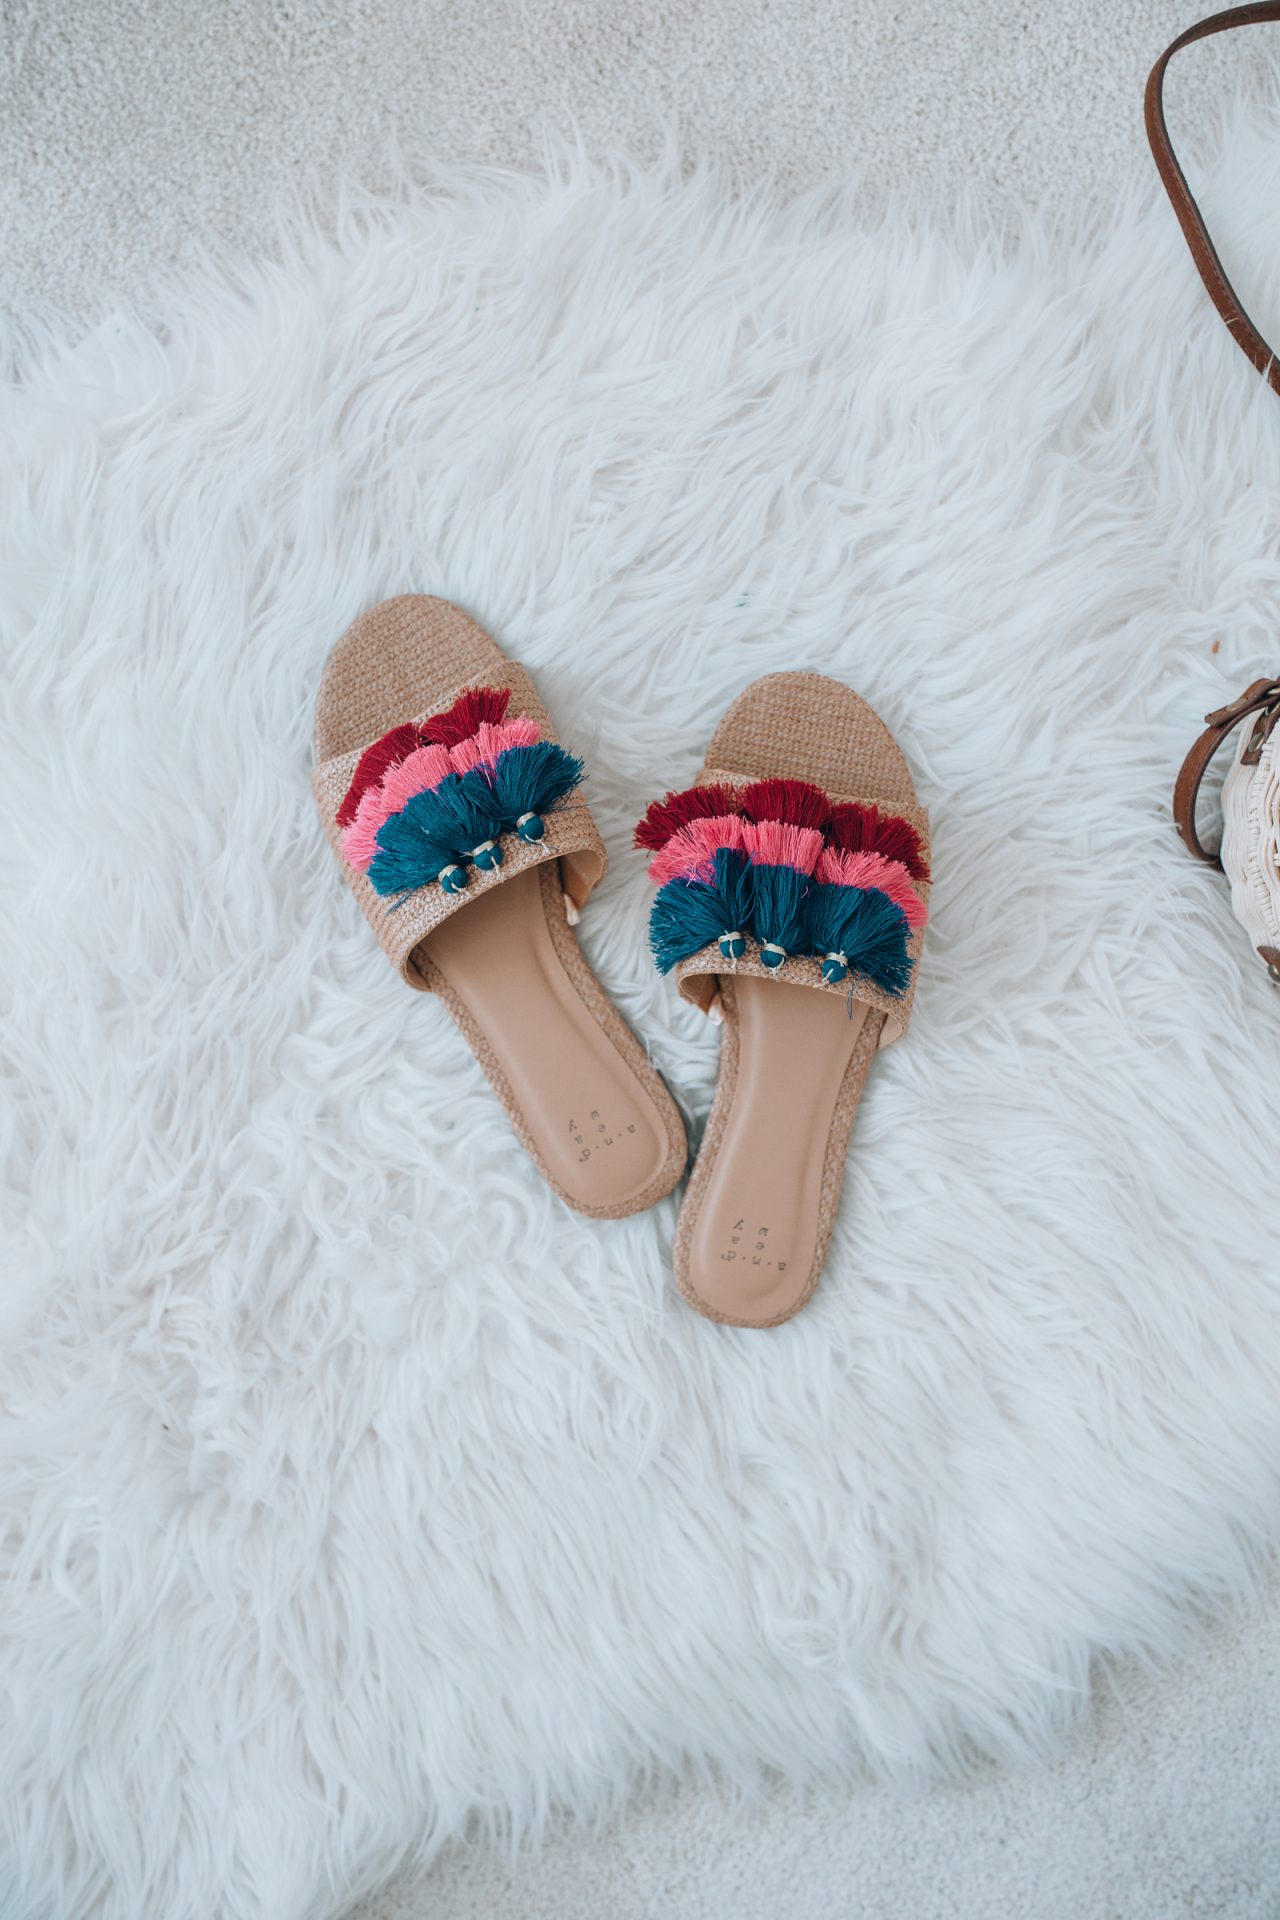 Chicago fashion blogger Happily Inspired is sharing the best spring and summer shoes at every budget! Espadrilles, sandals, sneakers and more.